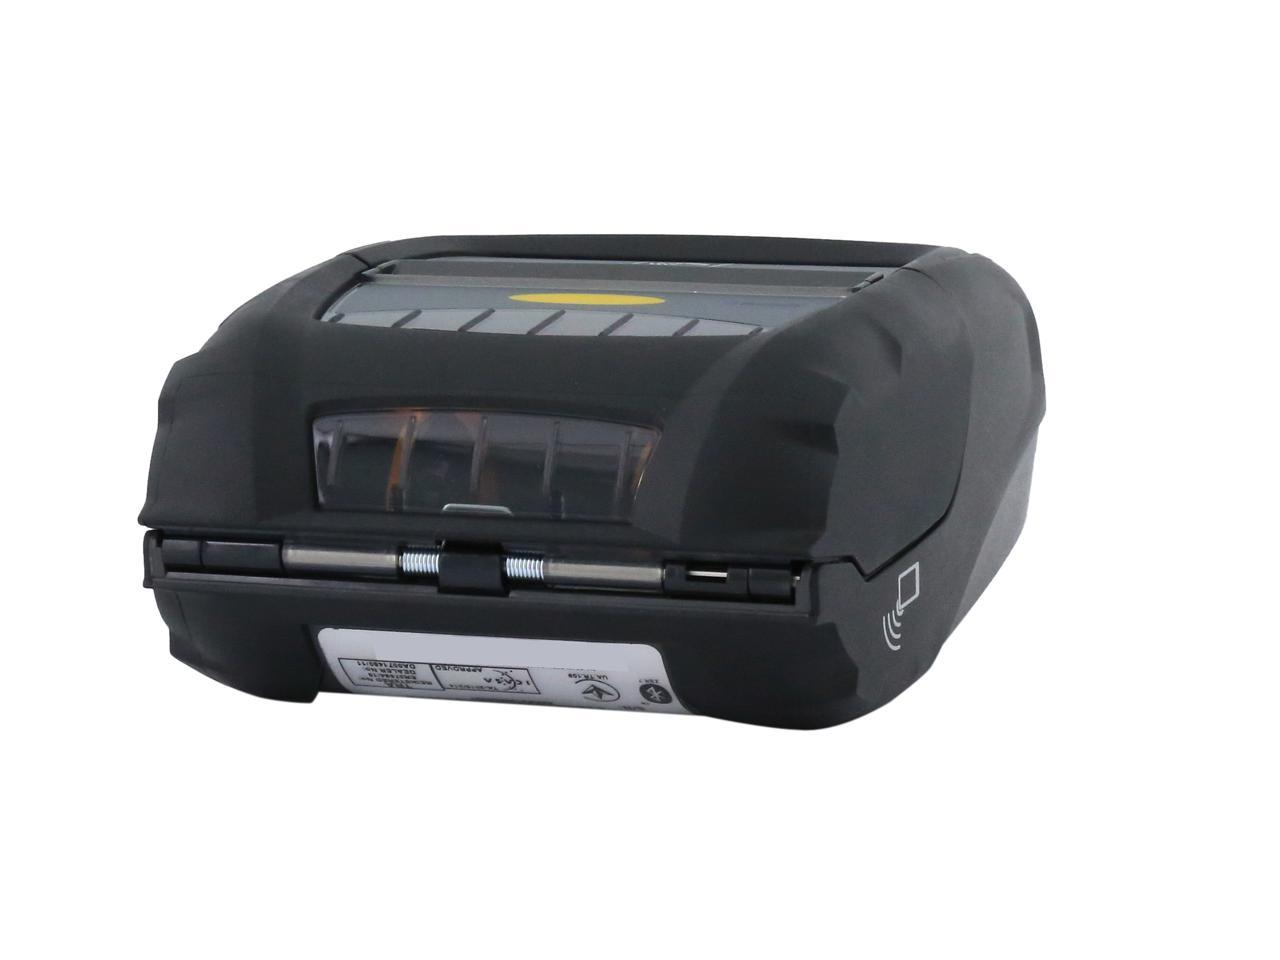 Zebra Zq510 3 Mobile Direct Thermal Receipt And Label Printer 203 Dpi Bluetooth 40 Linered 7774